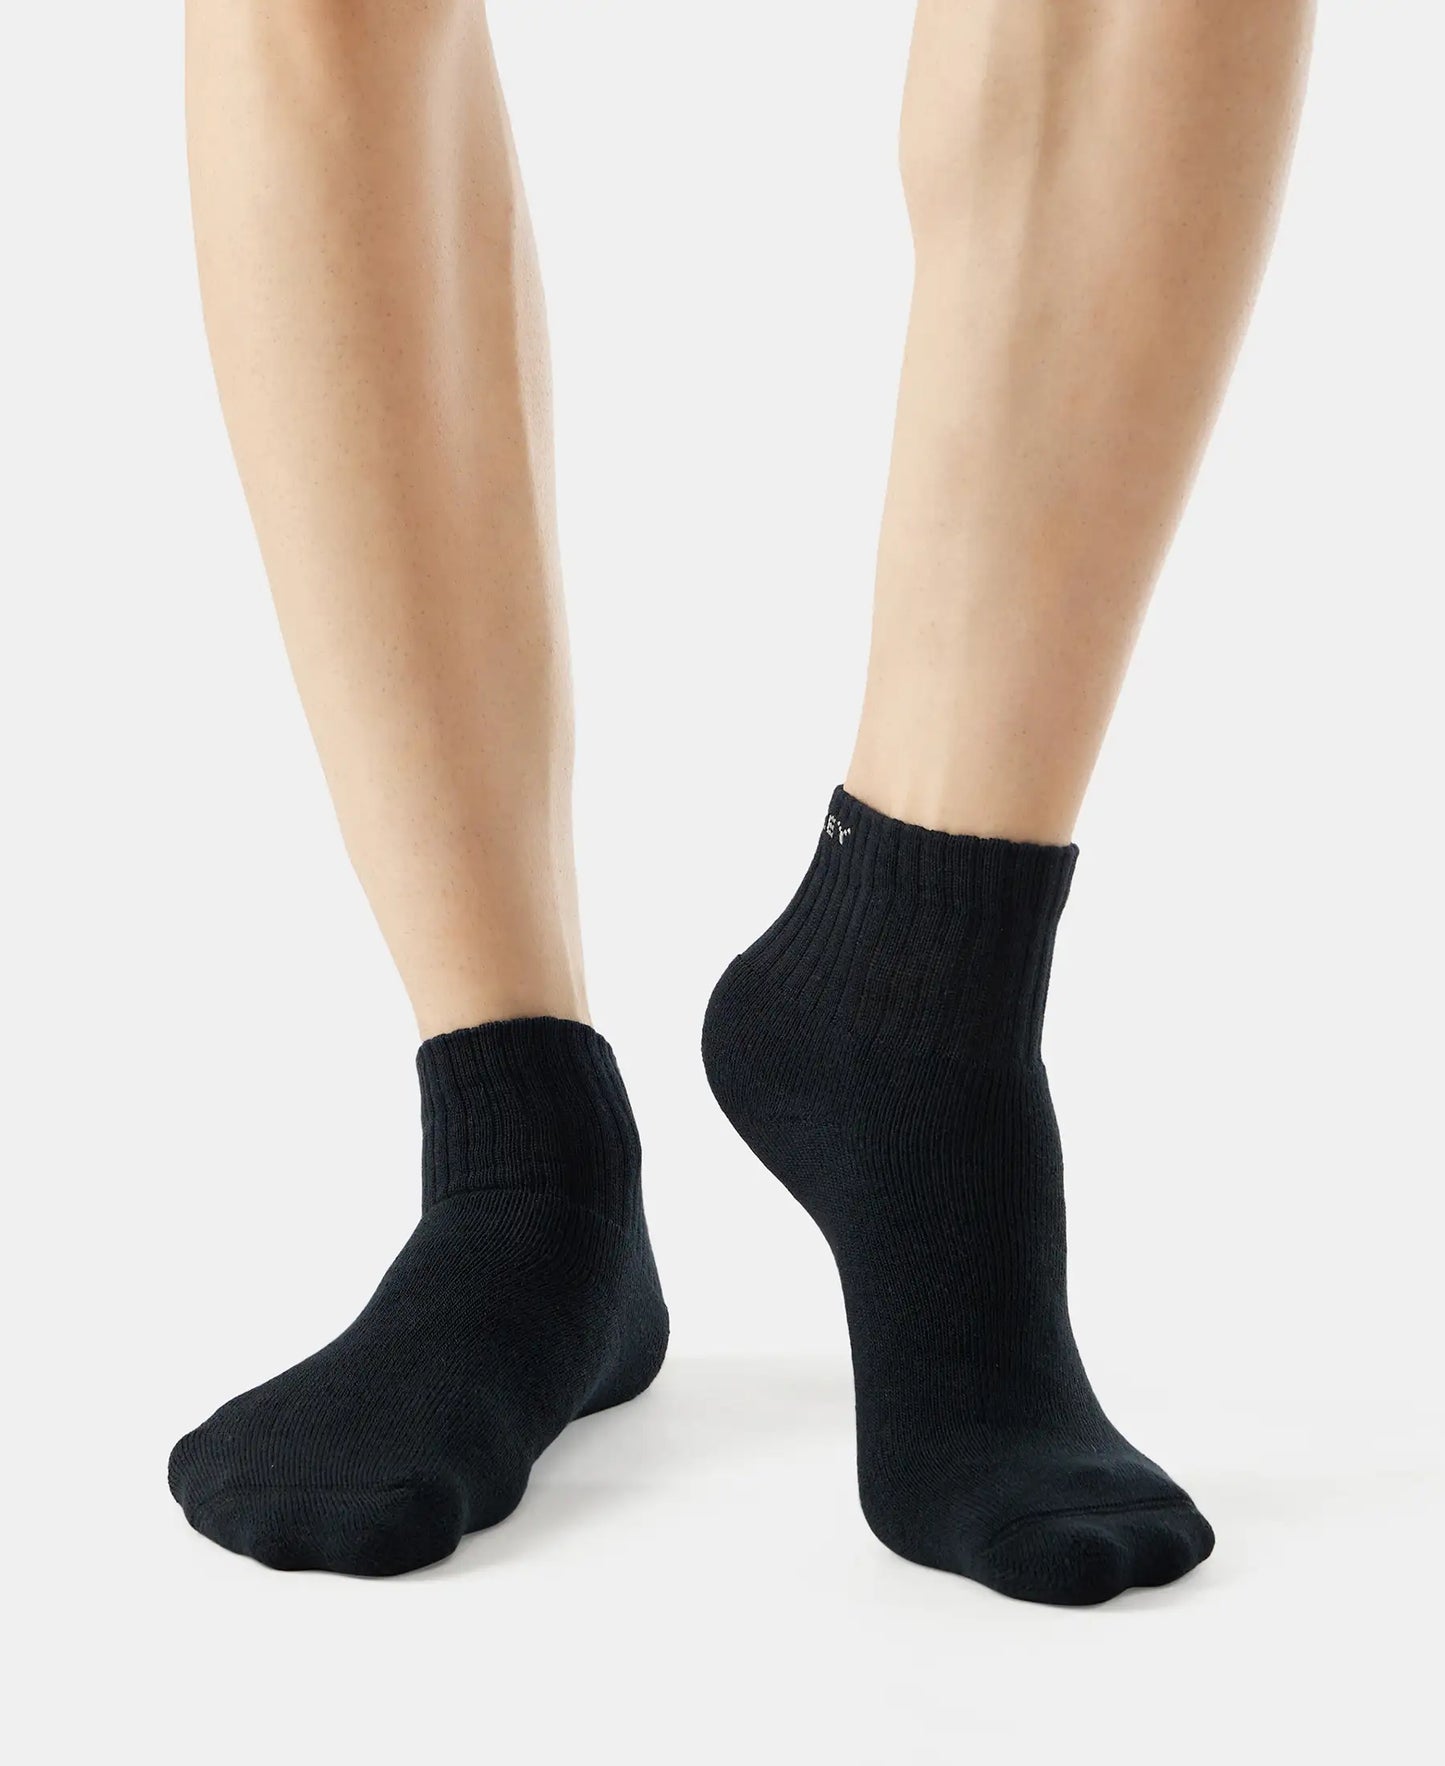 Compact Cotton Terry Ankle Length Socks With StayFresh Treatment - Black/Midgrey Melange/Charcoal Melange-4